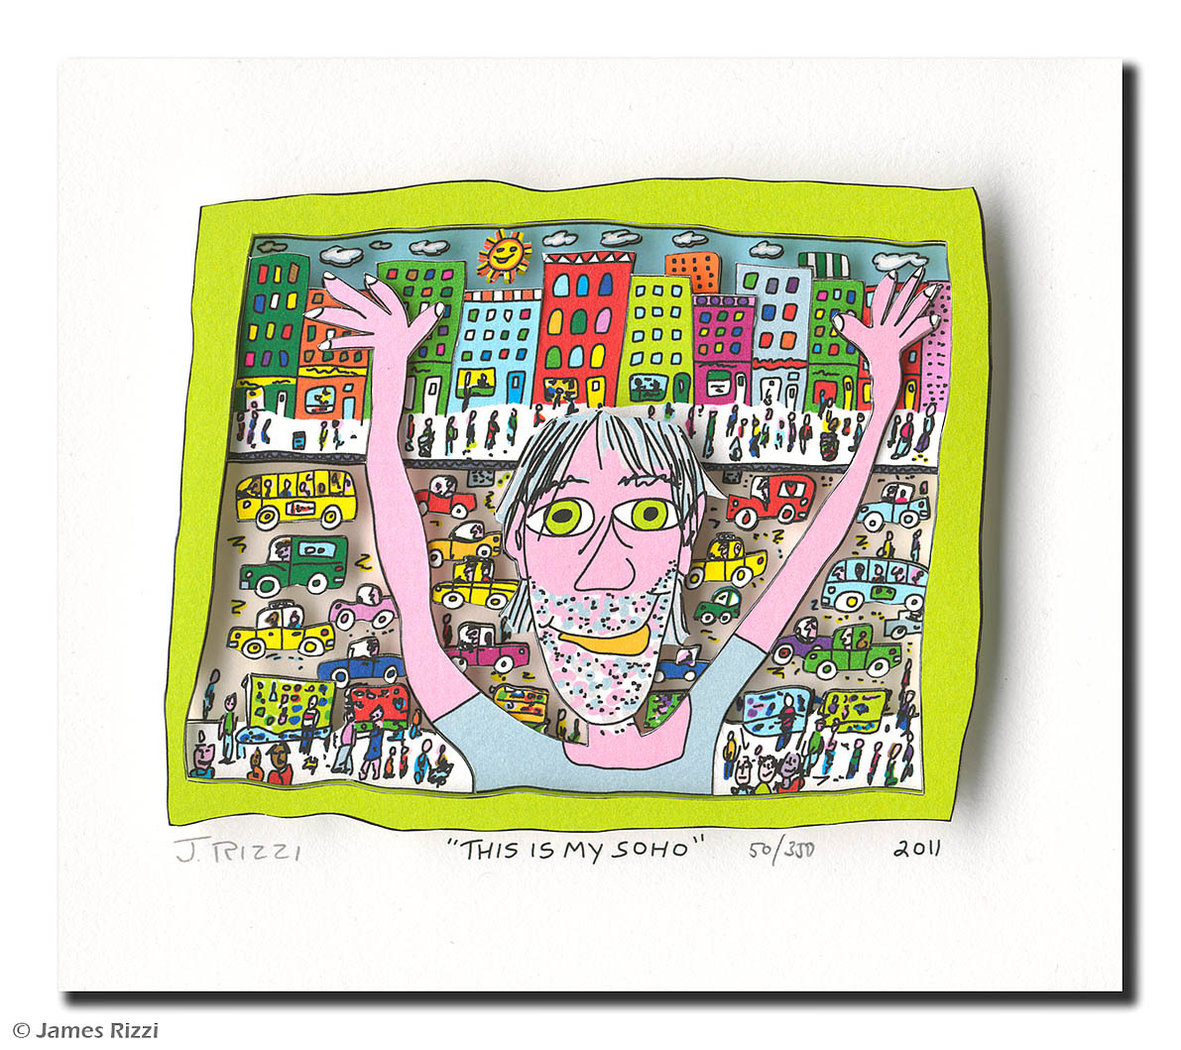 James Rizzi - THIS IS MY SOHO